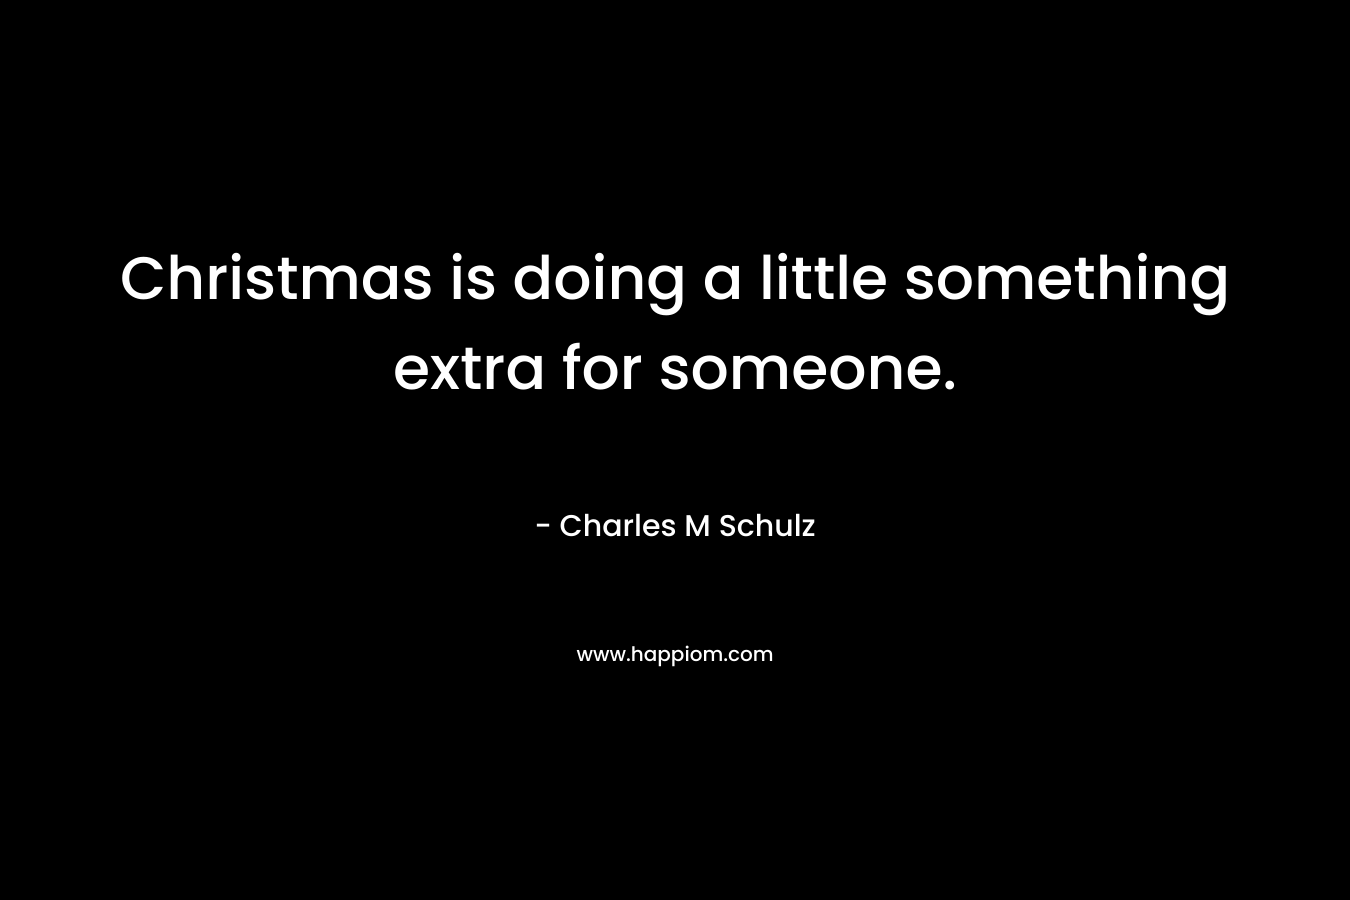 Christmas is doing a little something extra for someone. – Charles M Schulz